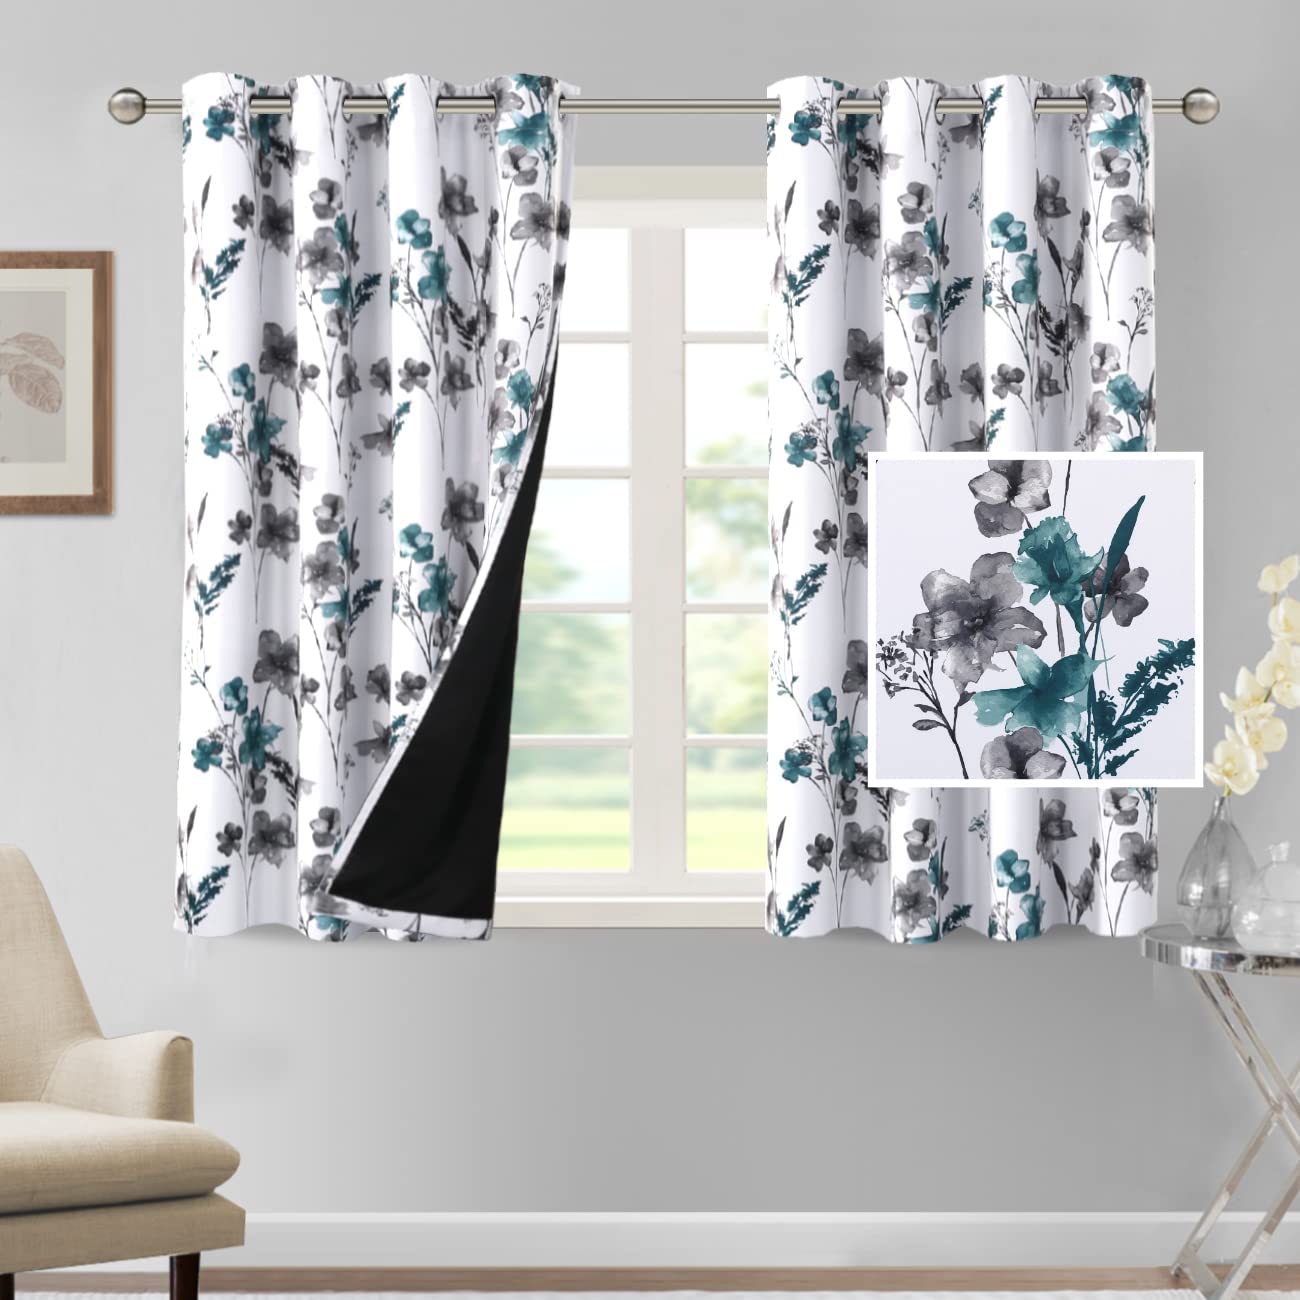  VOGOL Printed Bedroom Curtains, Window Grommet Panels Floral  Room Darkening Drapes,Curtain for Living Room and Balcony, W52x L63 inch,  One Panel, Purple : Home & Kitchen